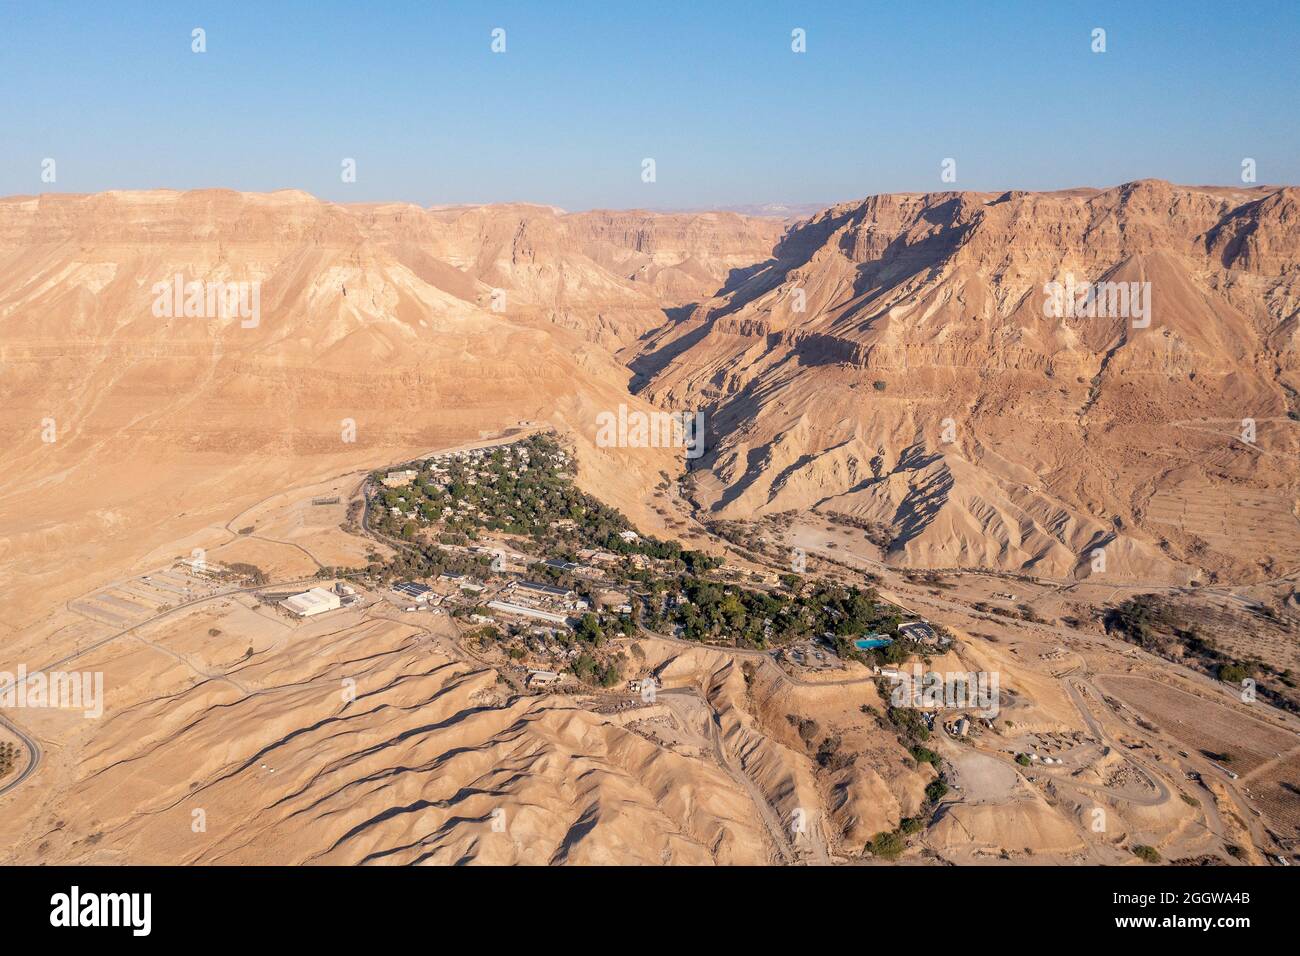 Aerial view of Kibbutz Ein Gedi oasis and nature reserve. Stock Photo